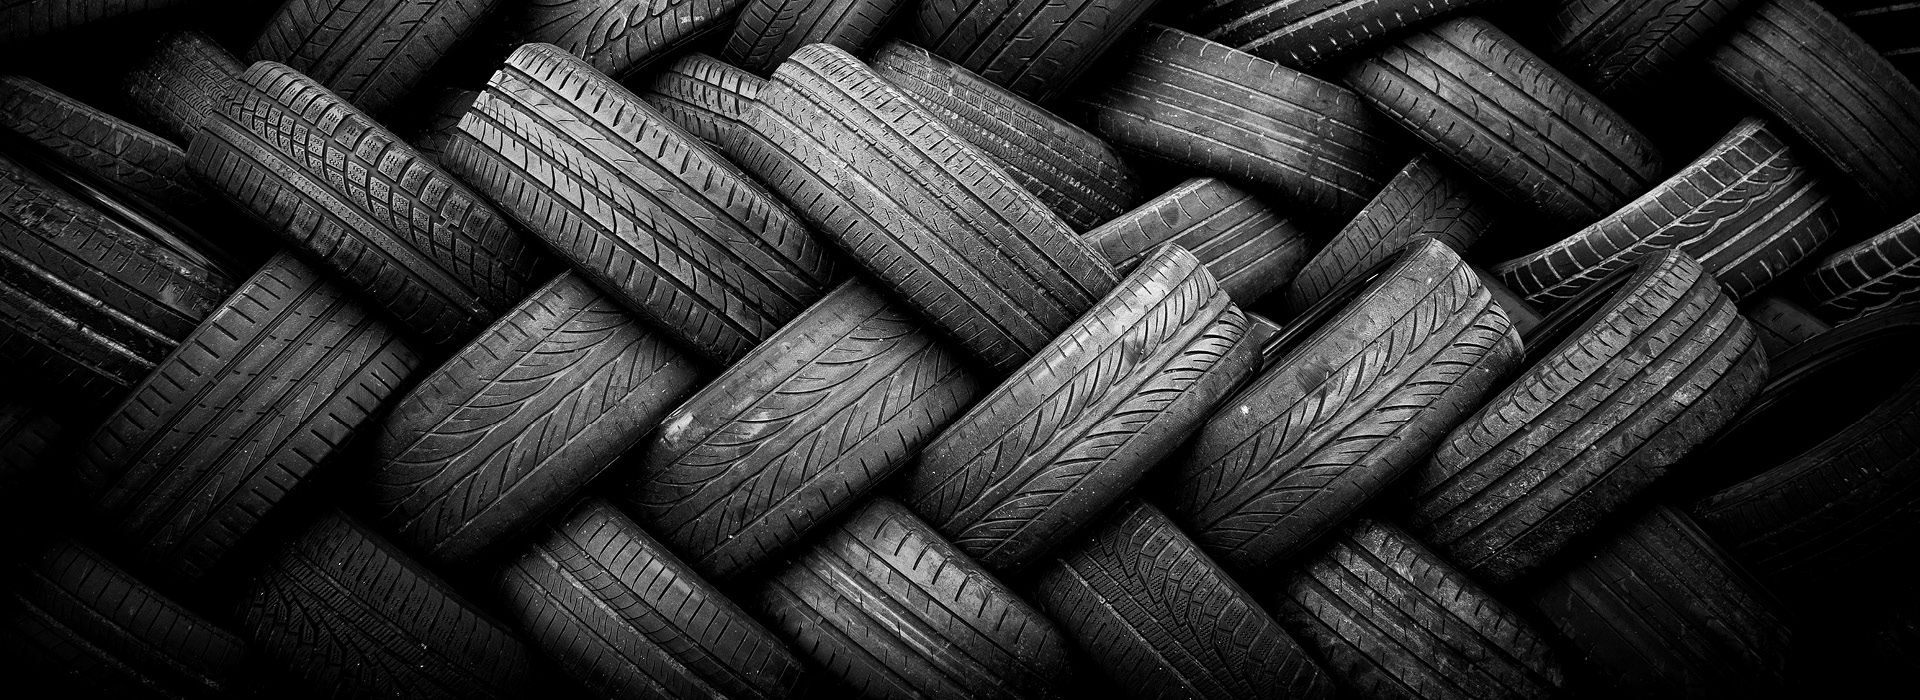 Some 1.37 million tons of tyres remain unrecycled in Europe every year. © Fulgar